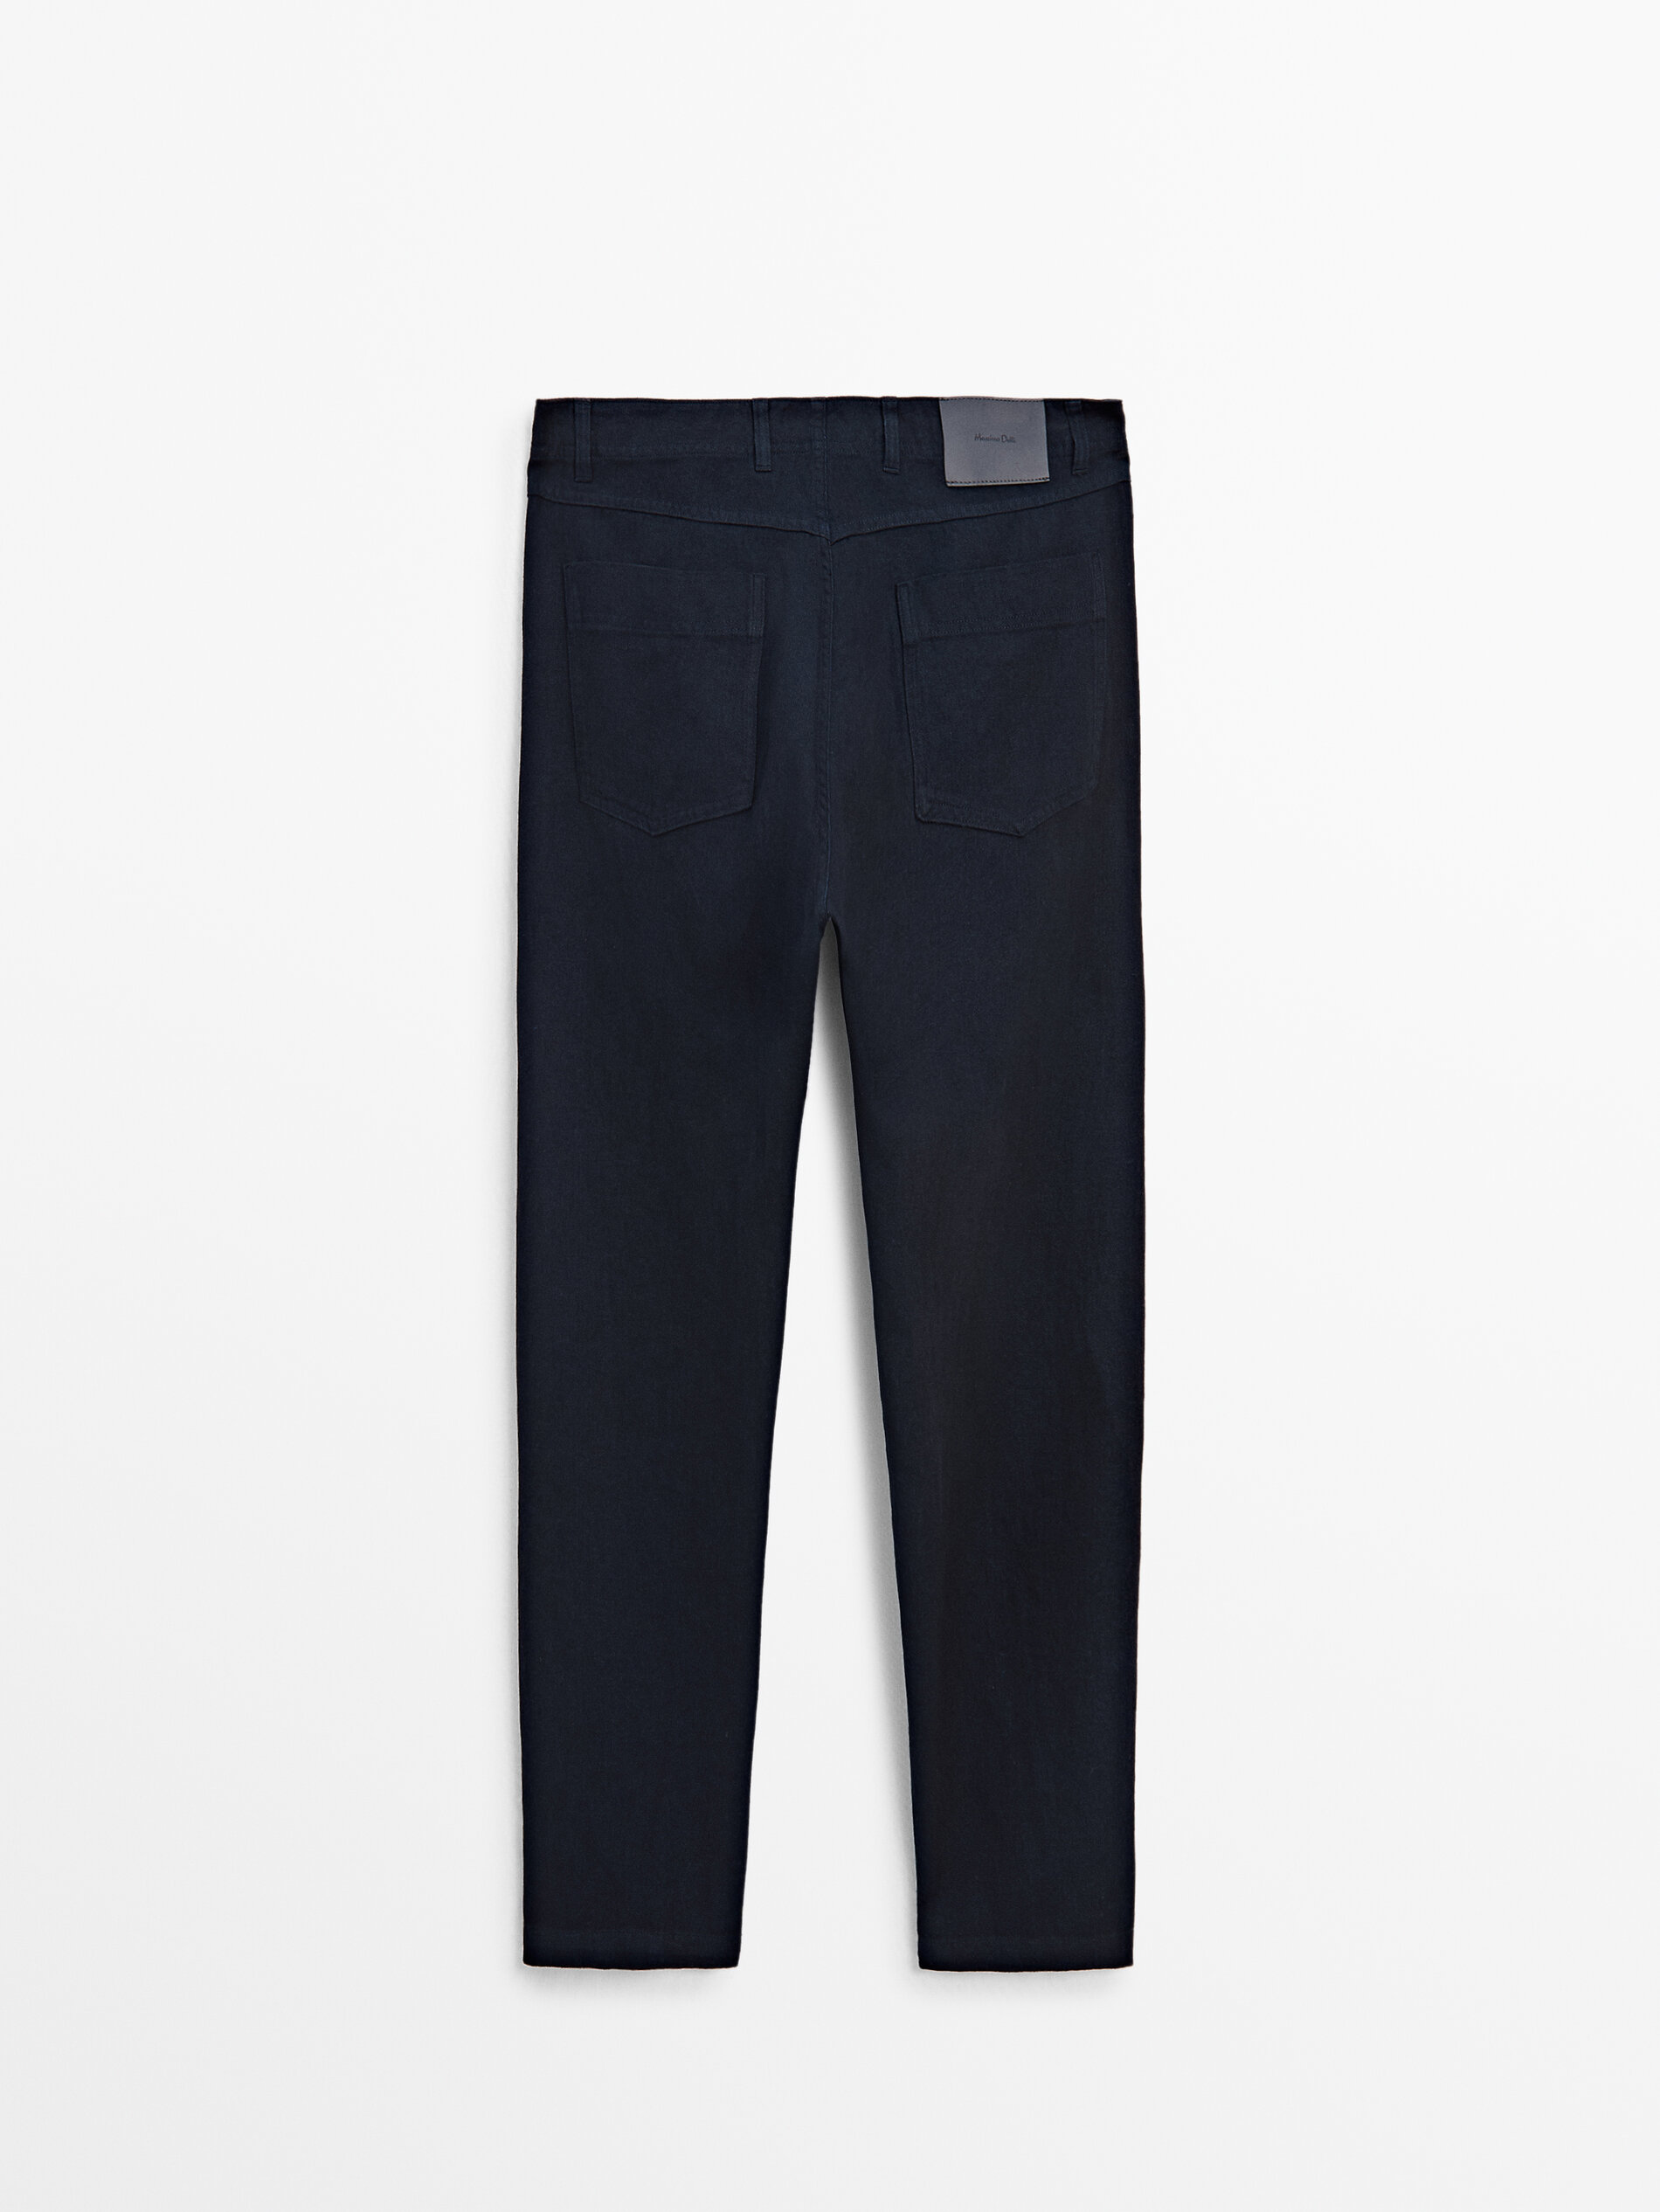 Relaxed fit cotton blend denim trousers · Navy Blue, Cream 